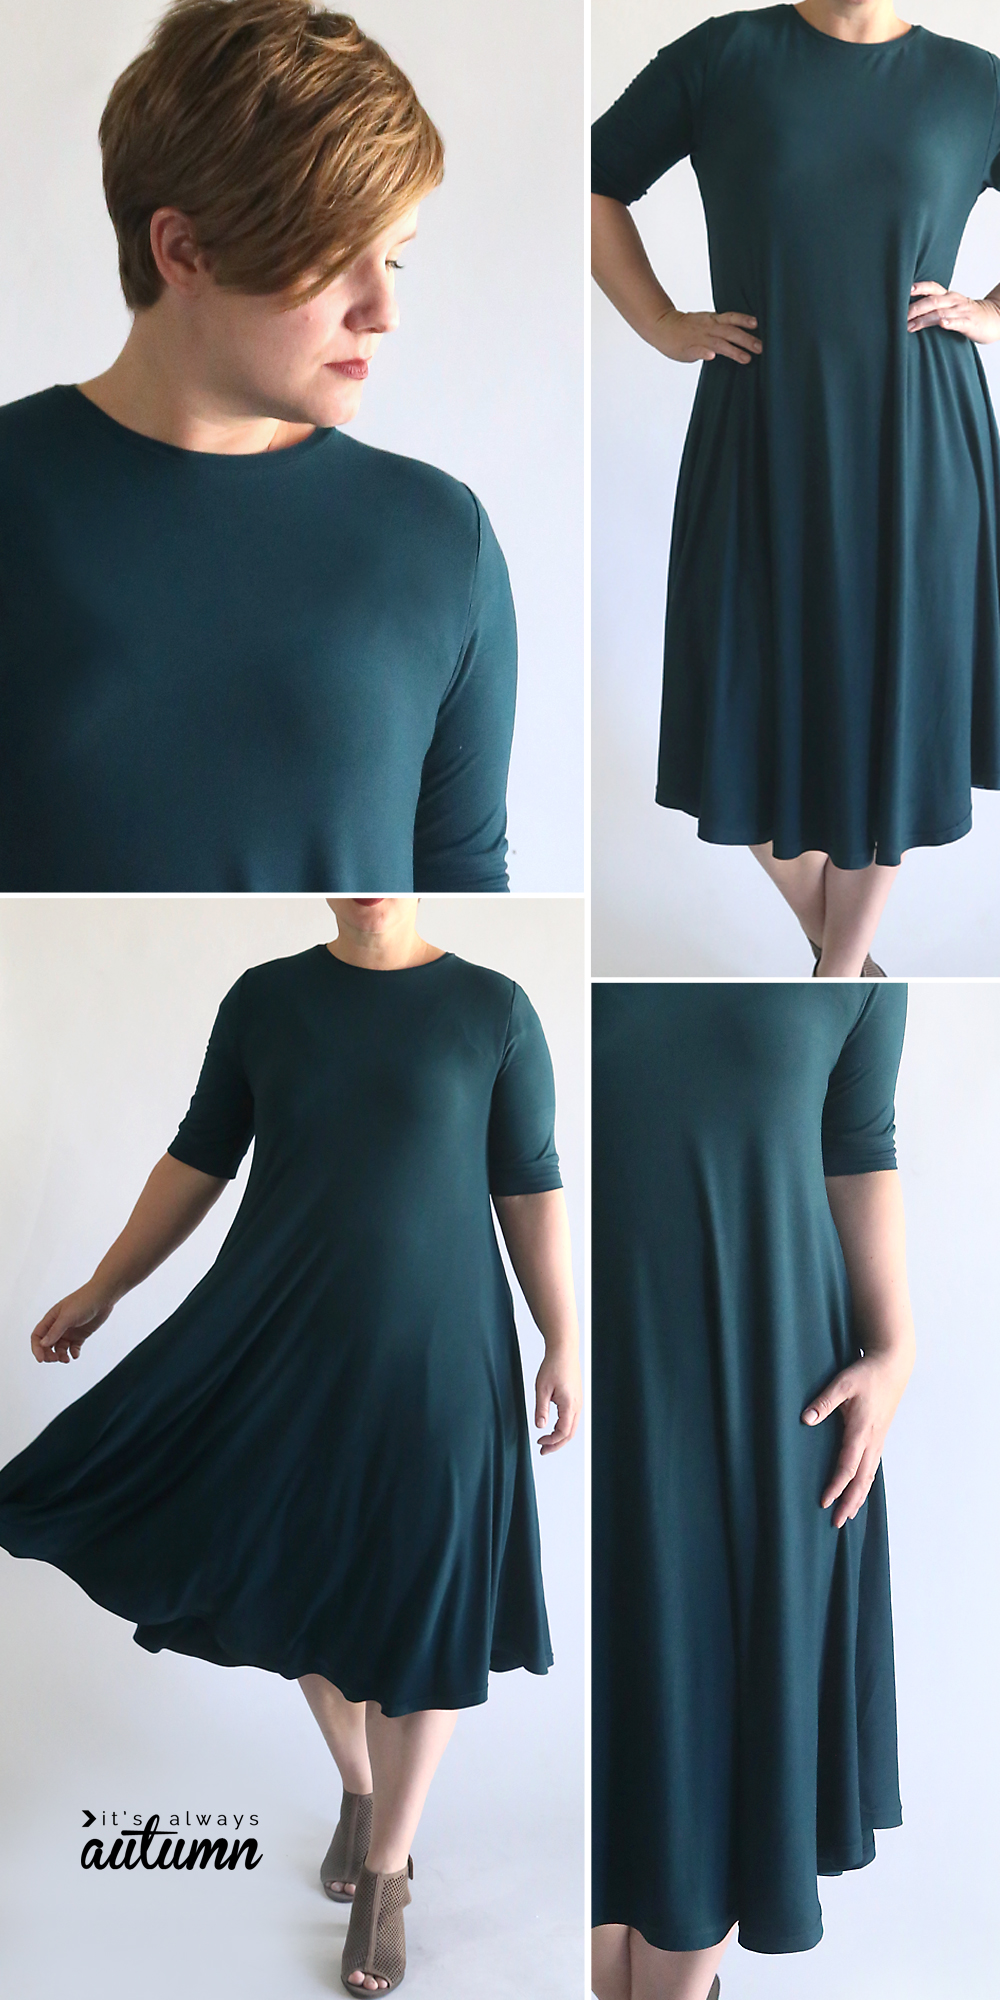 Easy swing dress pattern and sewing tutorial. How to sew a swing dress.